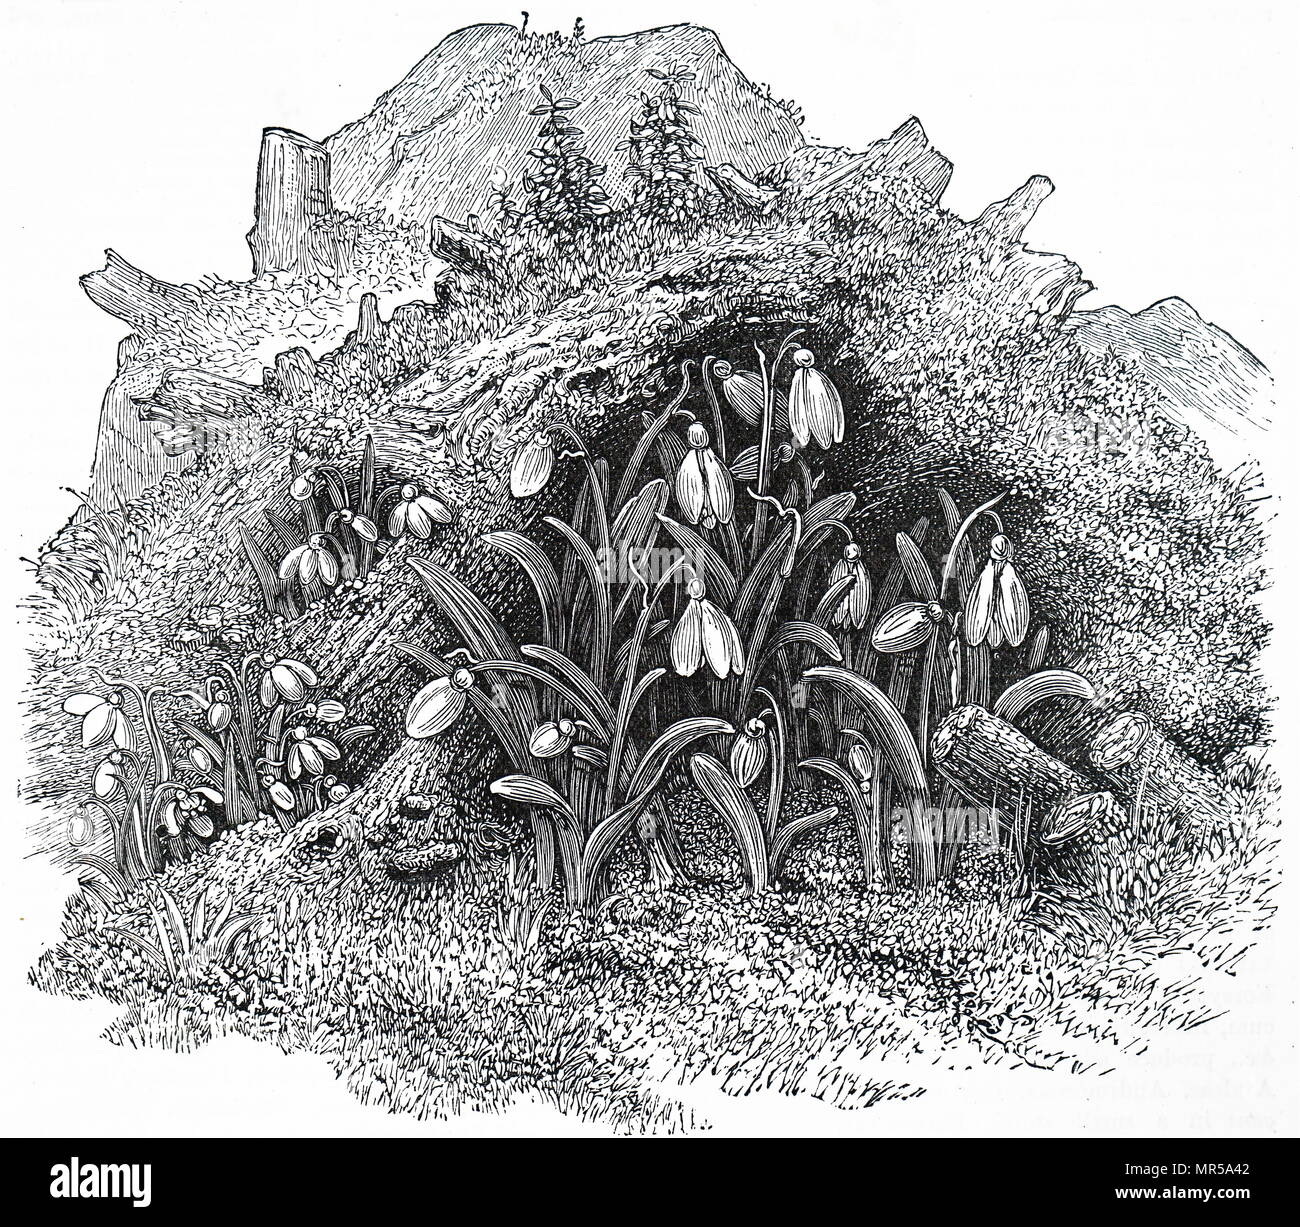 Engraving depicting snowdrops. Galanthus is a small genus of about 20 species of bulbous perennial herbaceous plants in the family Amaryllidaceae. The plants have two linear leaves and a single small white drooping bell shaped flower with six petal-like tepals in two circles. Dated 19th century Stock Photo